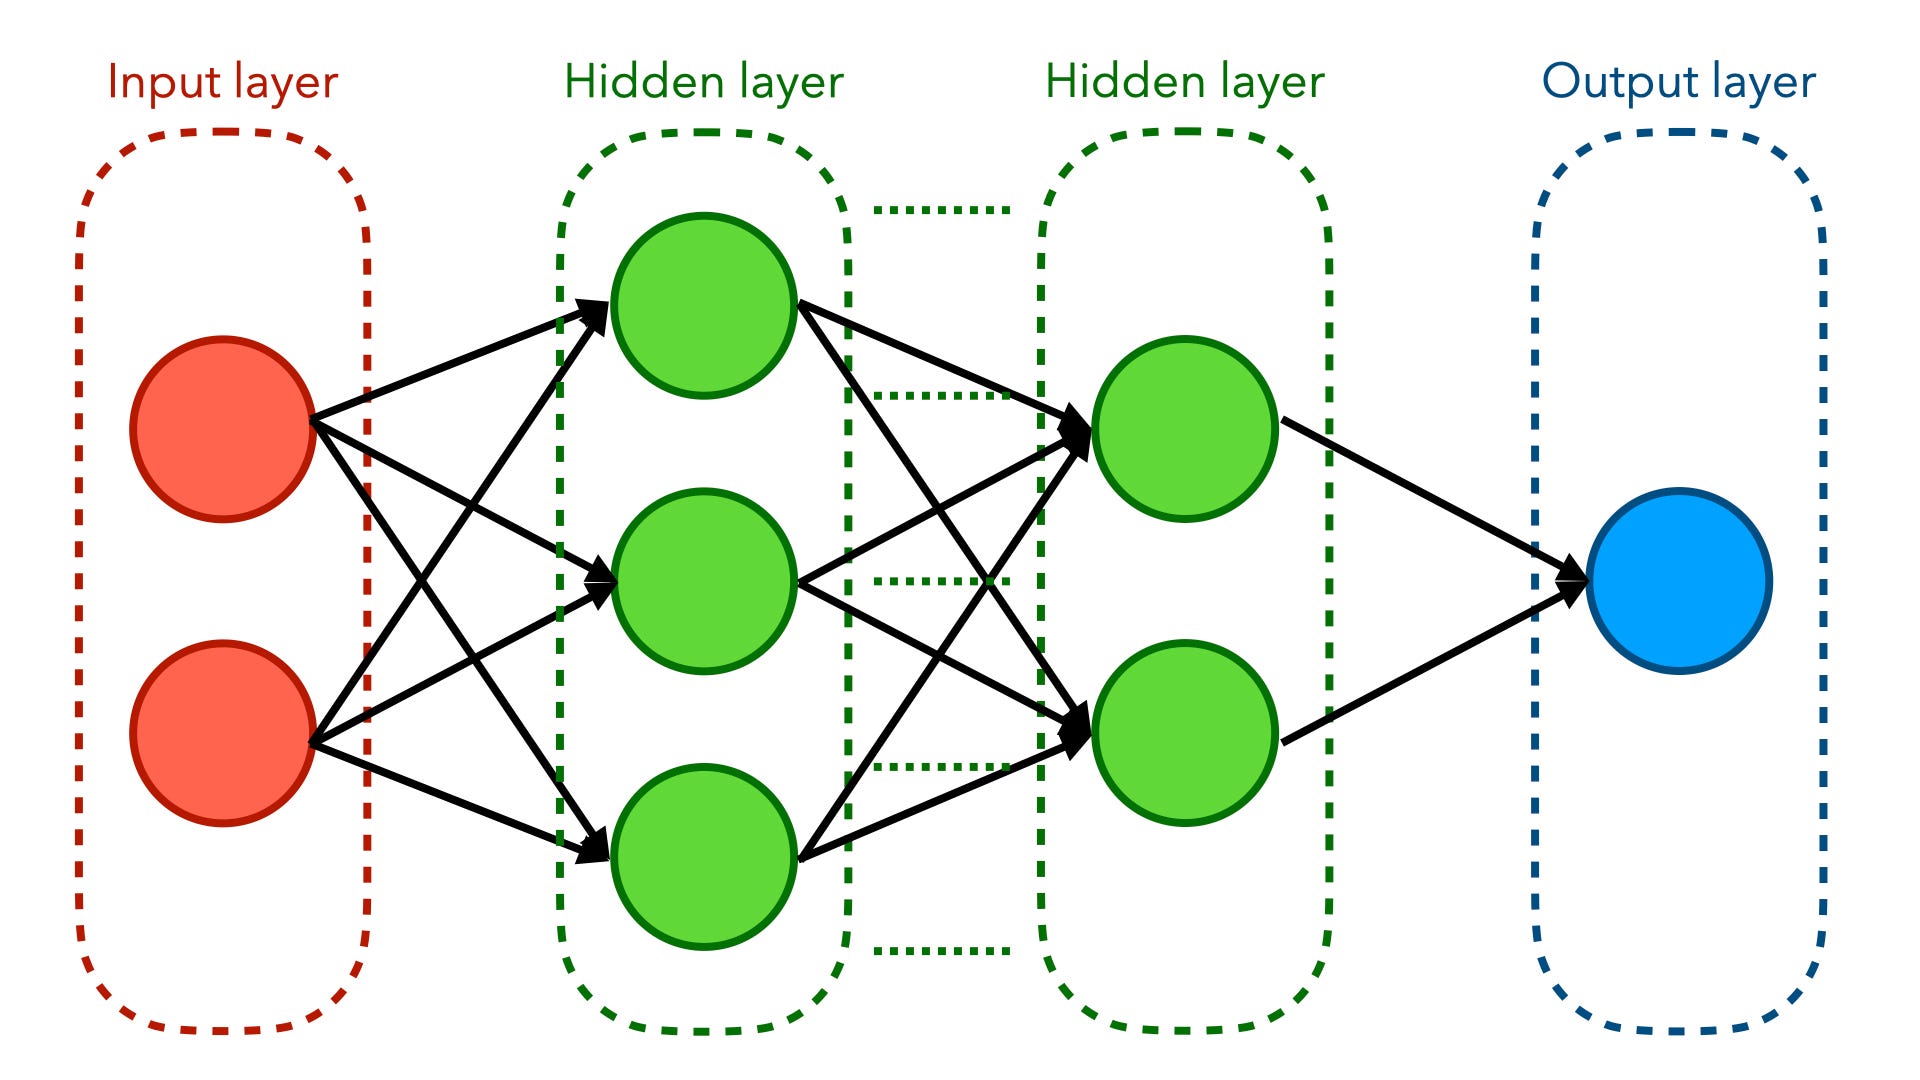 Artificial Neural Network layers